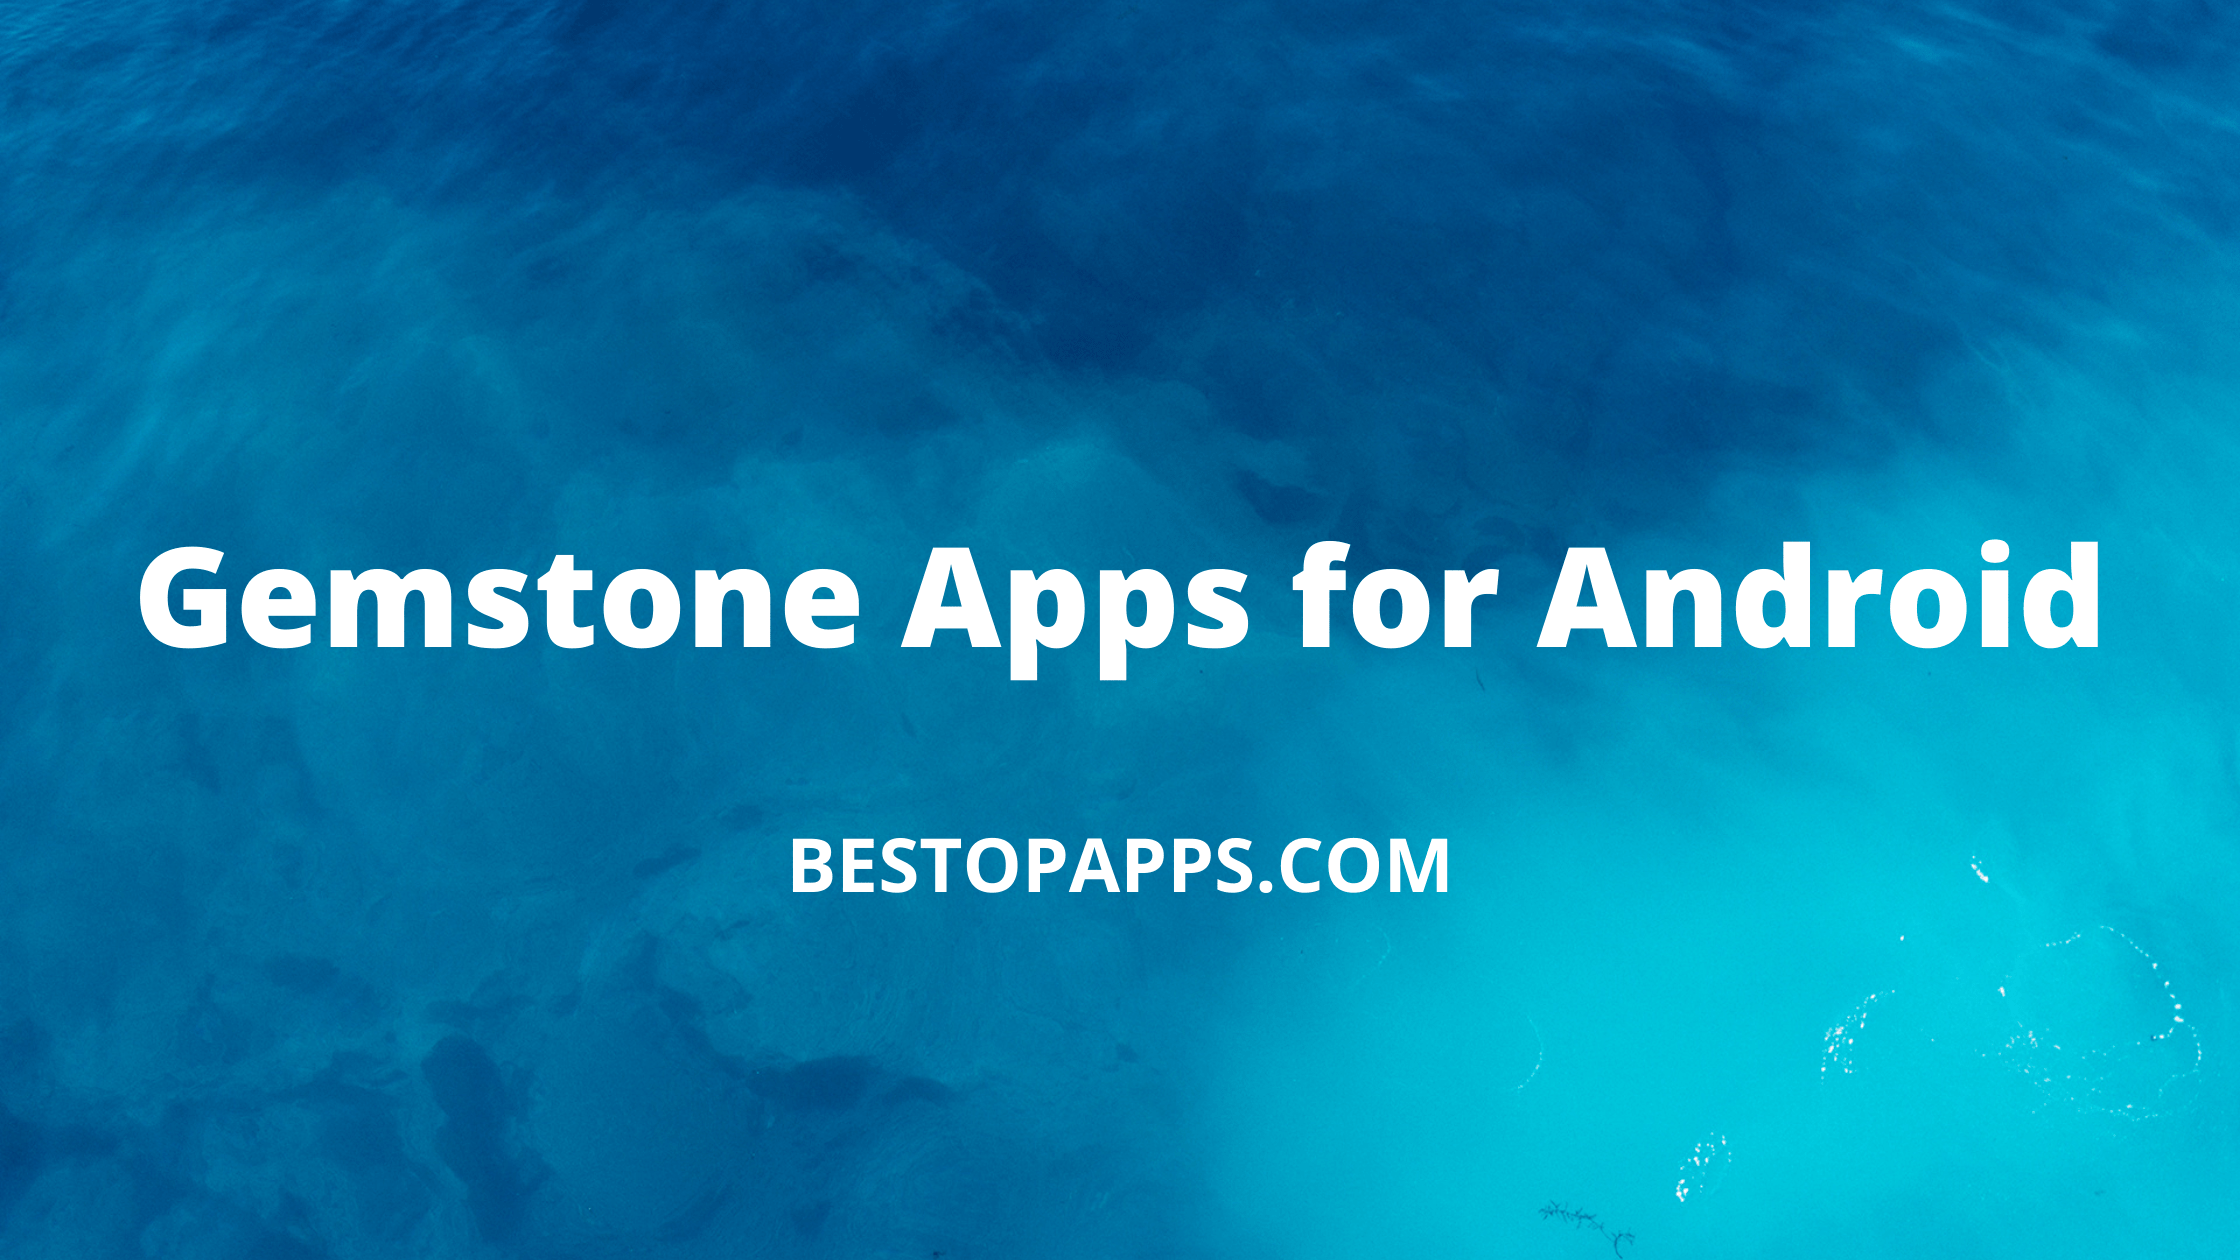 Gemstone Apps for Android